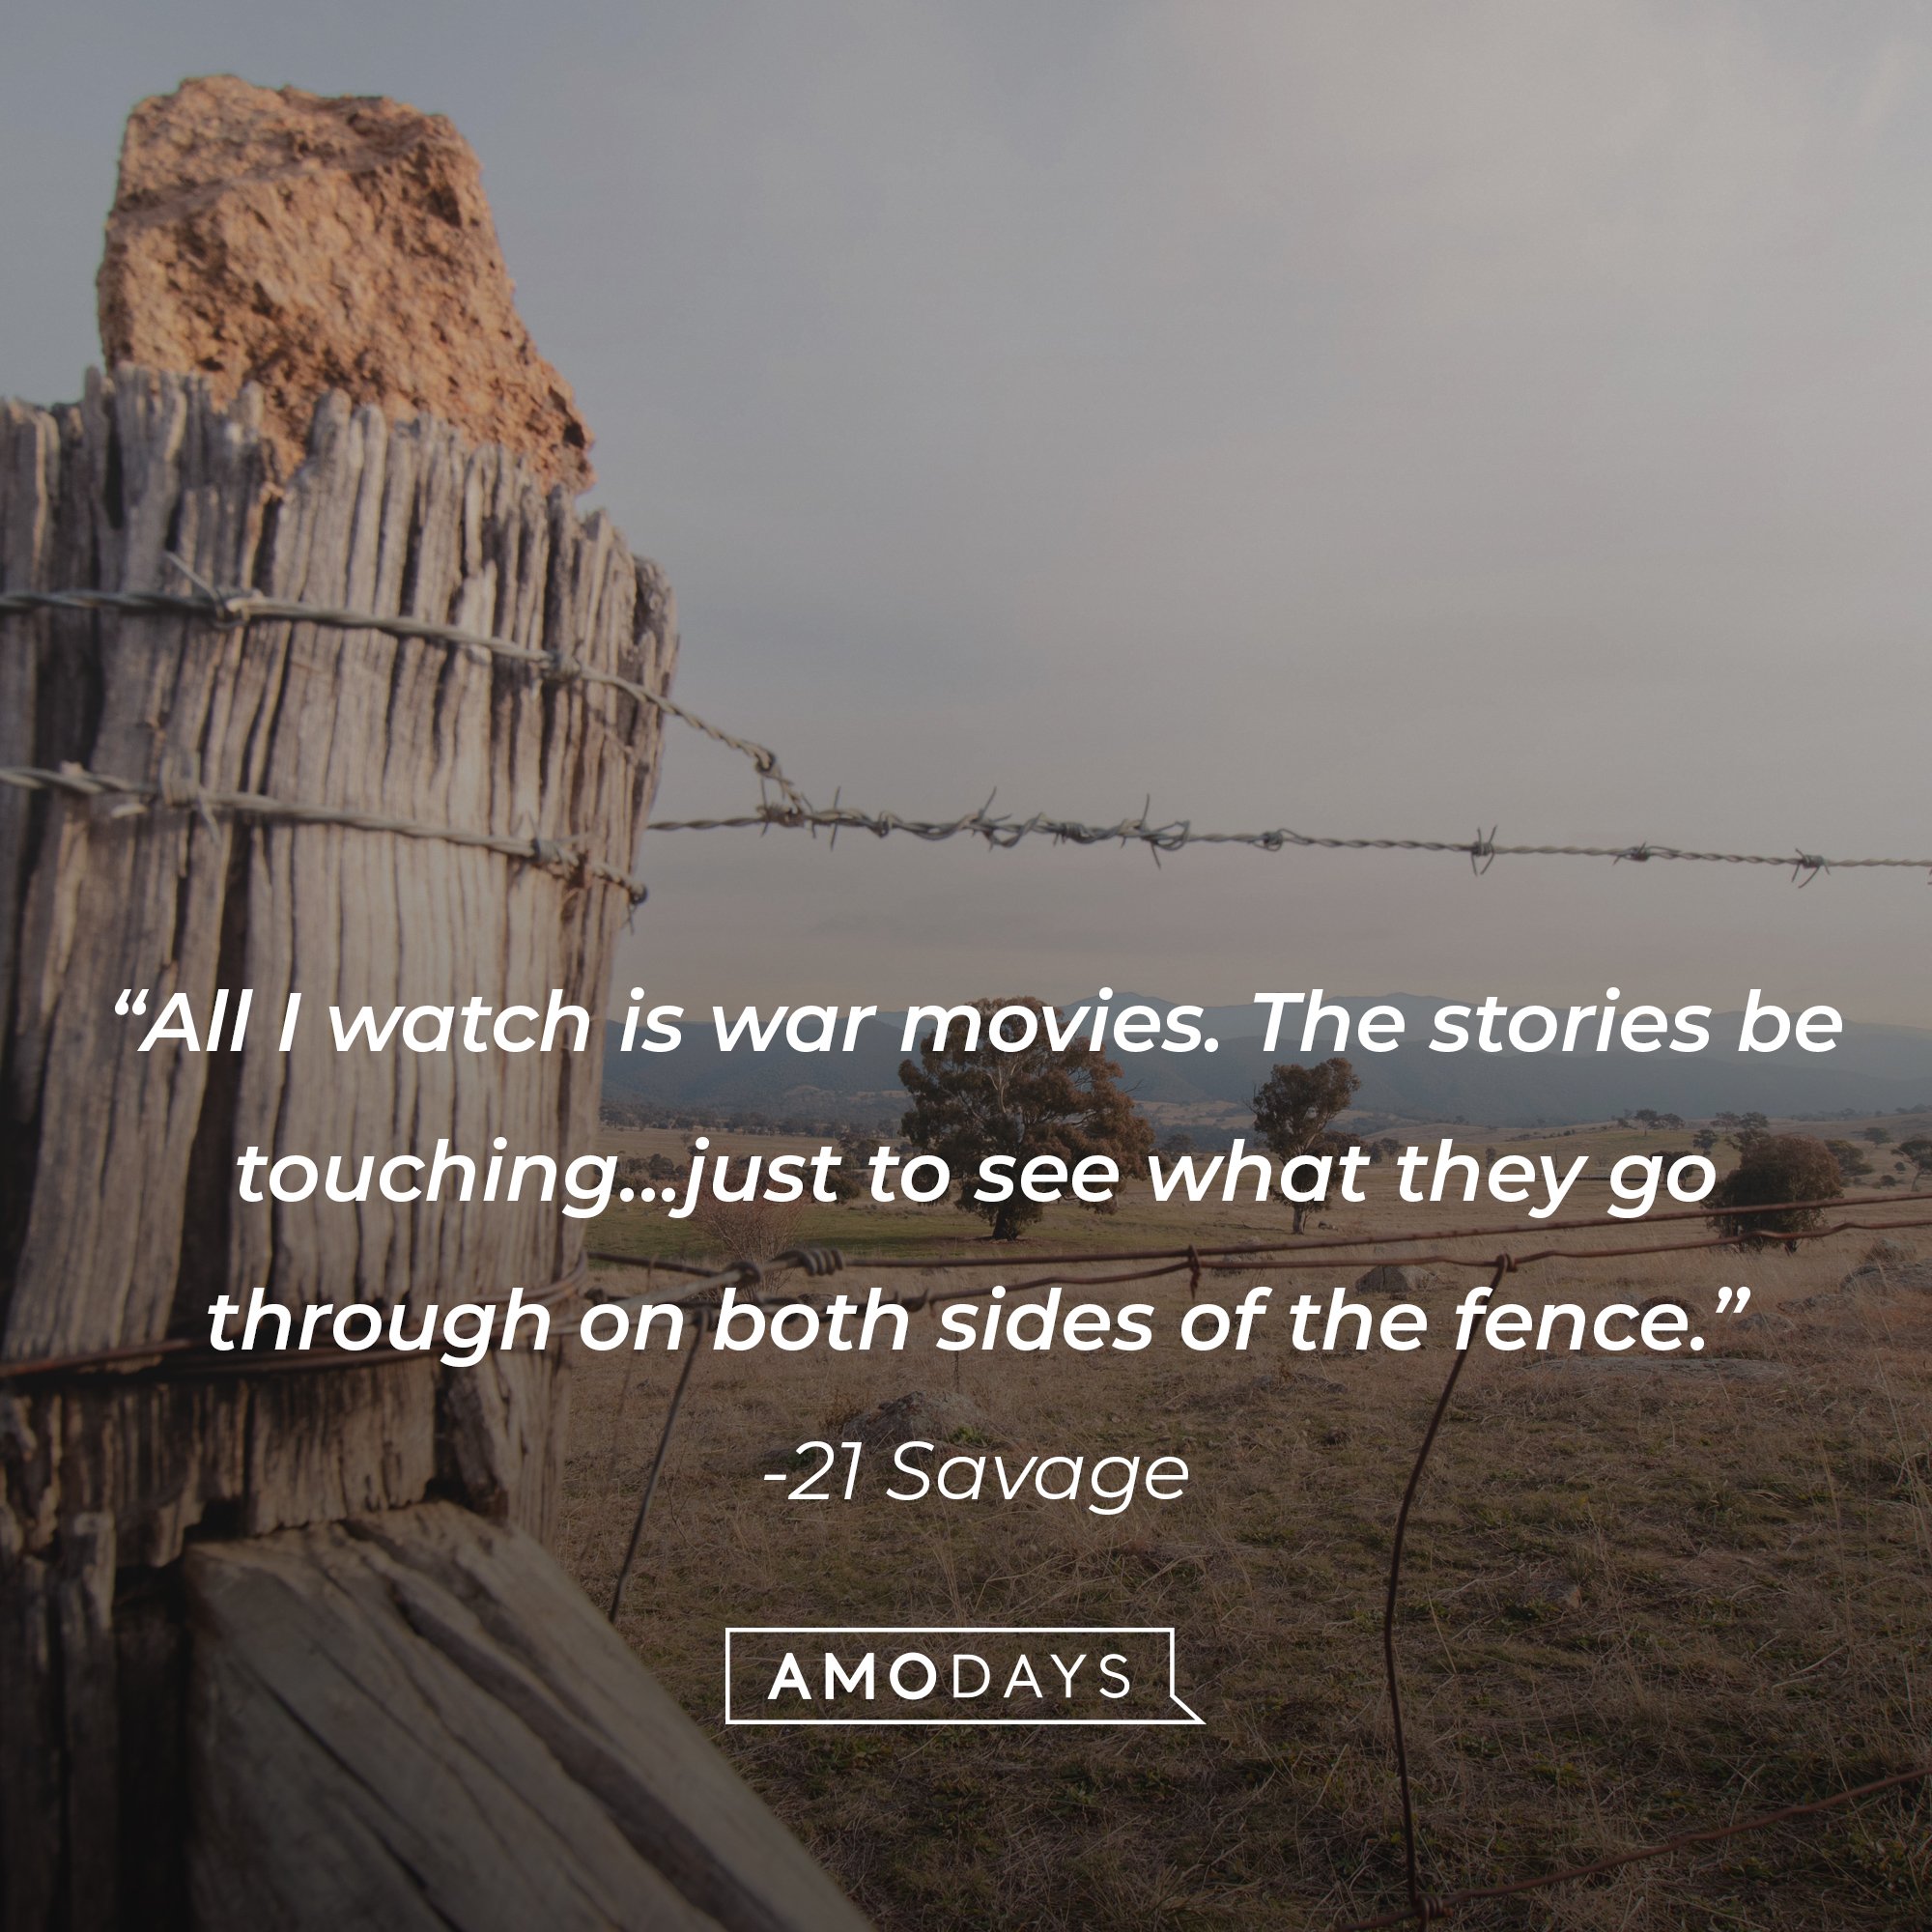 21 Savage's quote: “All I watch is war movies. The stories be touching… just to see what they go through on both sides of the fence.” | Image: AmoDays